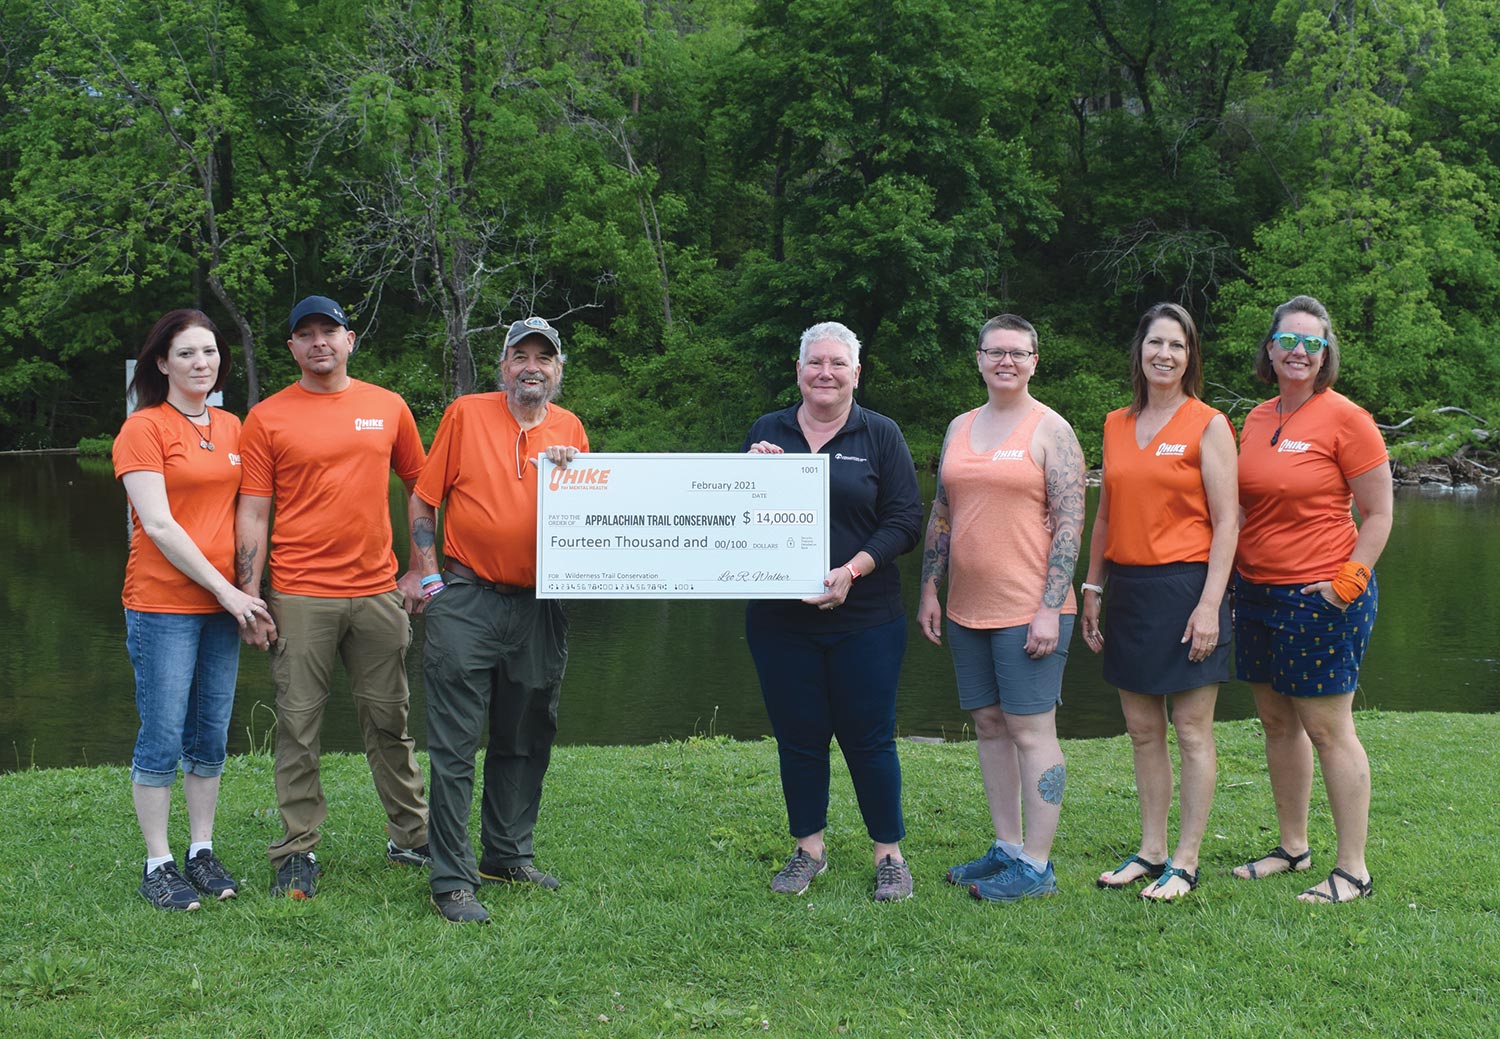 The organization Hike for Mental Health provides a generous donation to the Appalachian Trail Conservancy at Trail Days, received by Sandi Marra, ATC President and CEO (fourth from left)